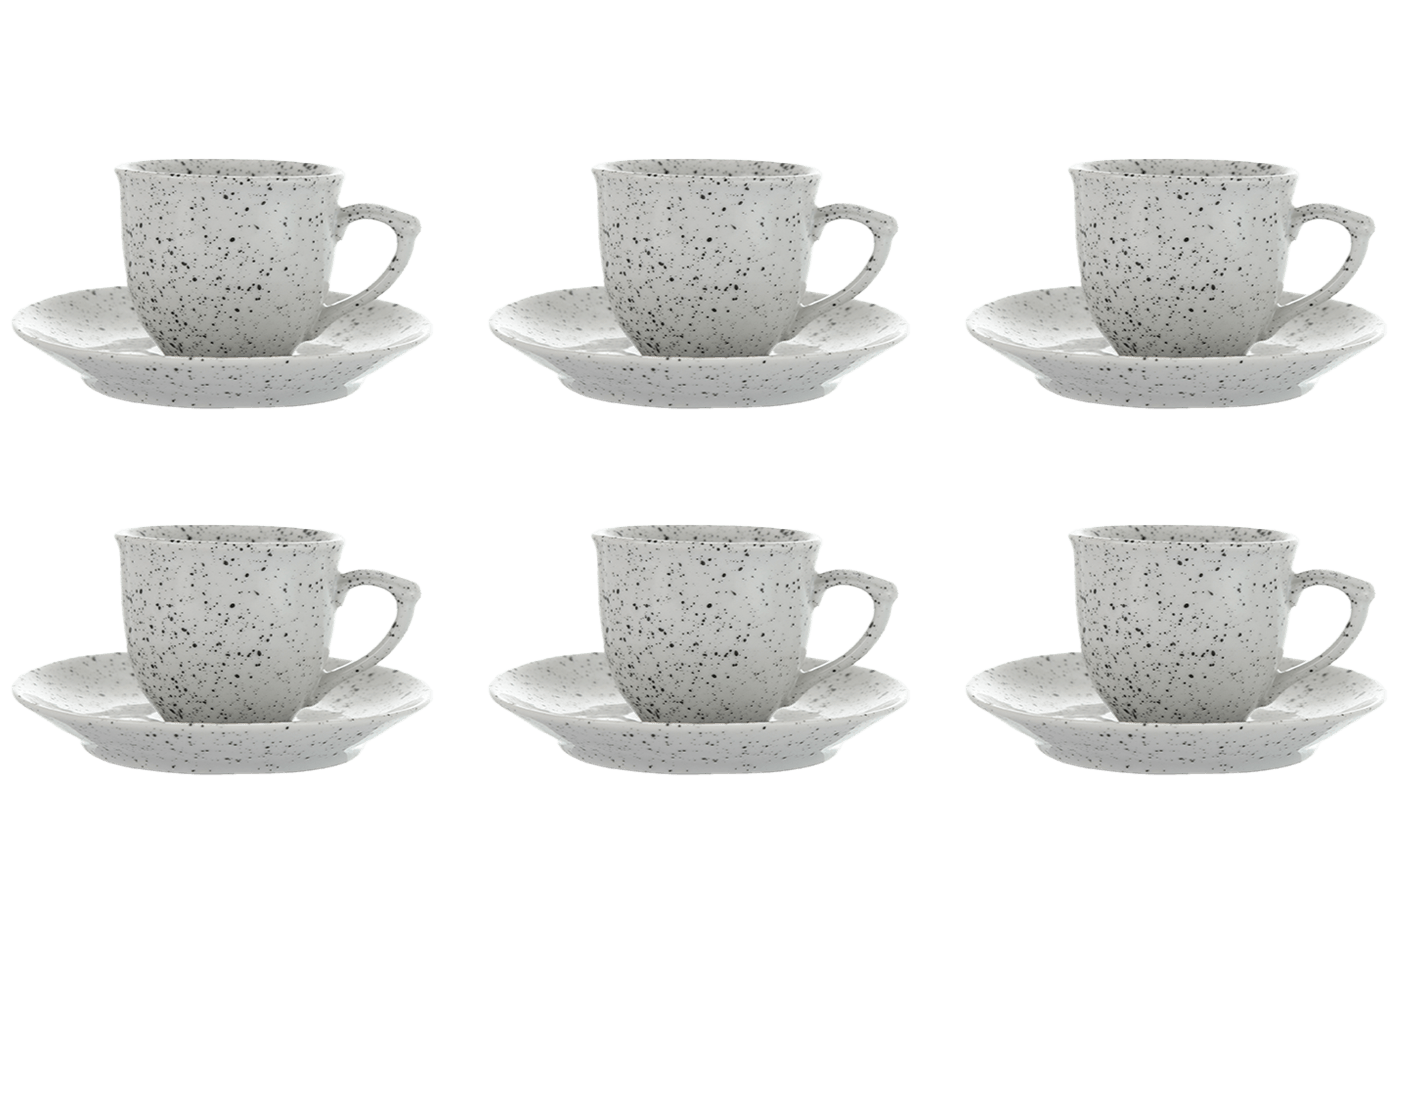 Senzo - Punti- Coffee Cup Set 6 Pieces with Saucer - Black - Porcelain - 165ml - 520001161x6